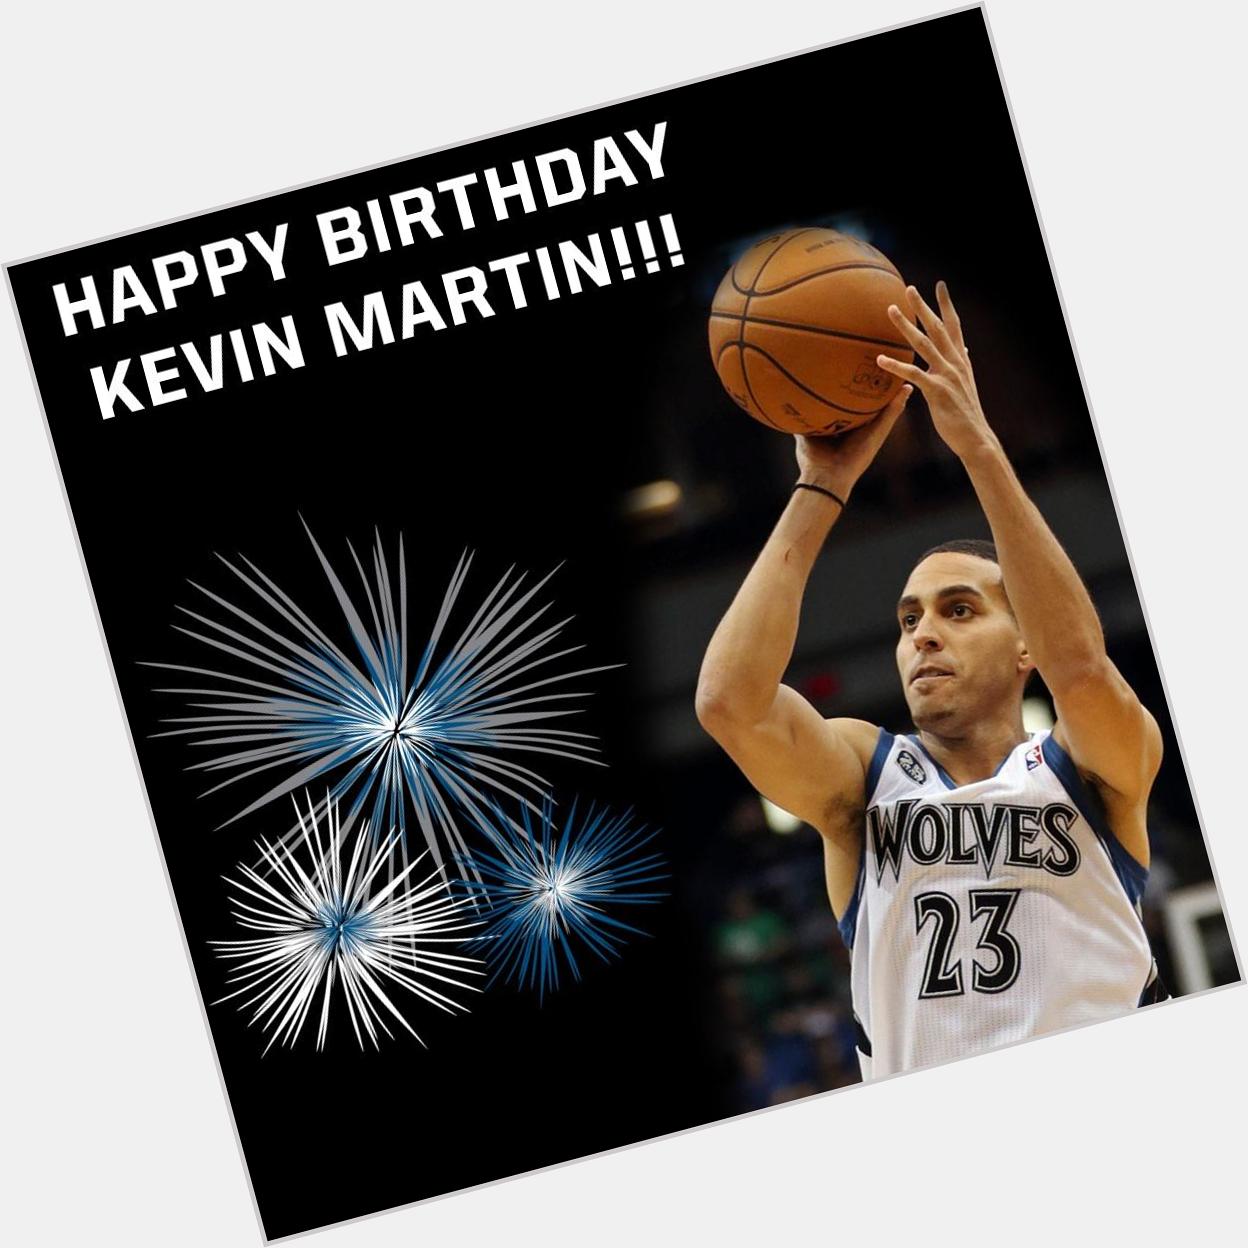 It\s a super Sunday for K-Mart as he turns 32 today! Happy Birthday to Kevin Martin of the 